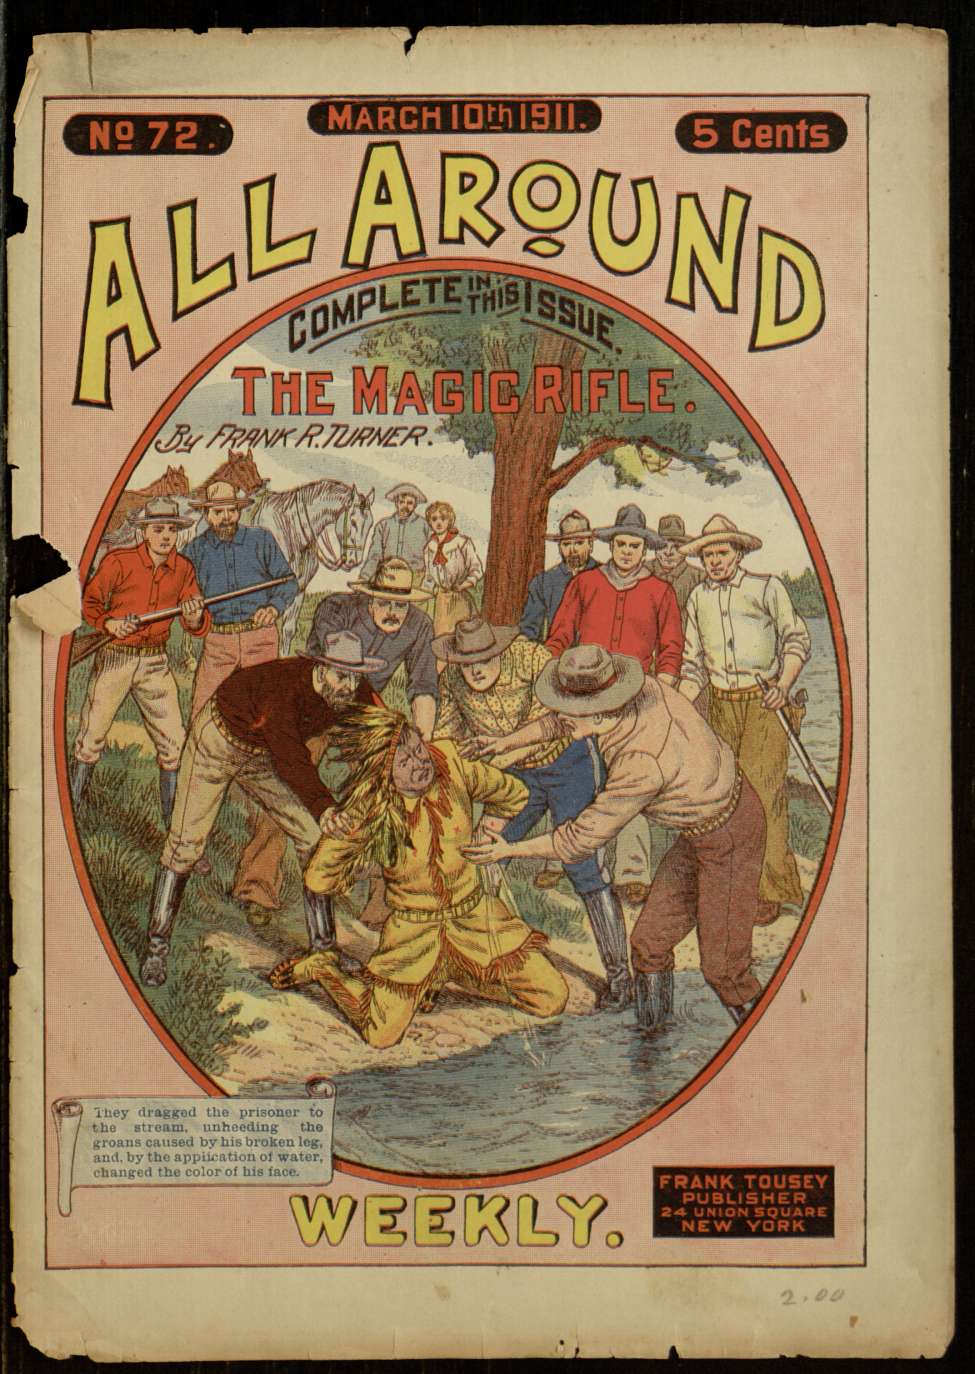 Book Cover For All Around Weekly 72 - The Magic Rifle